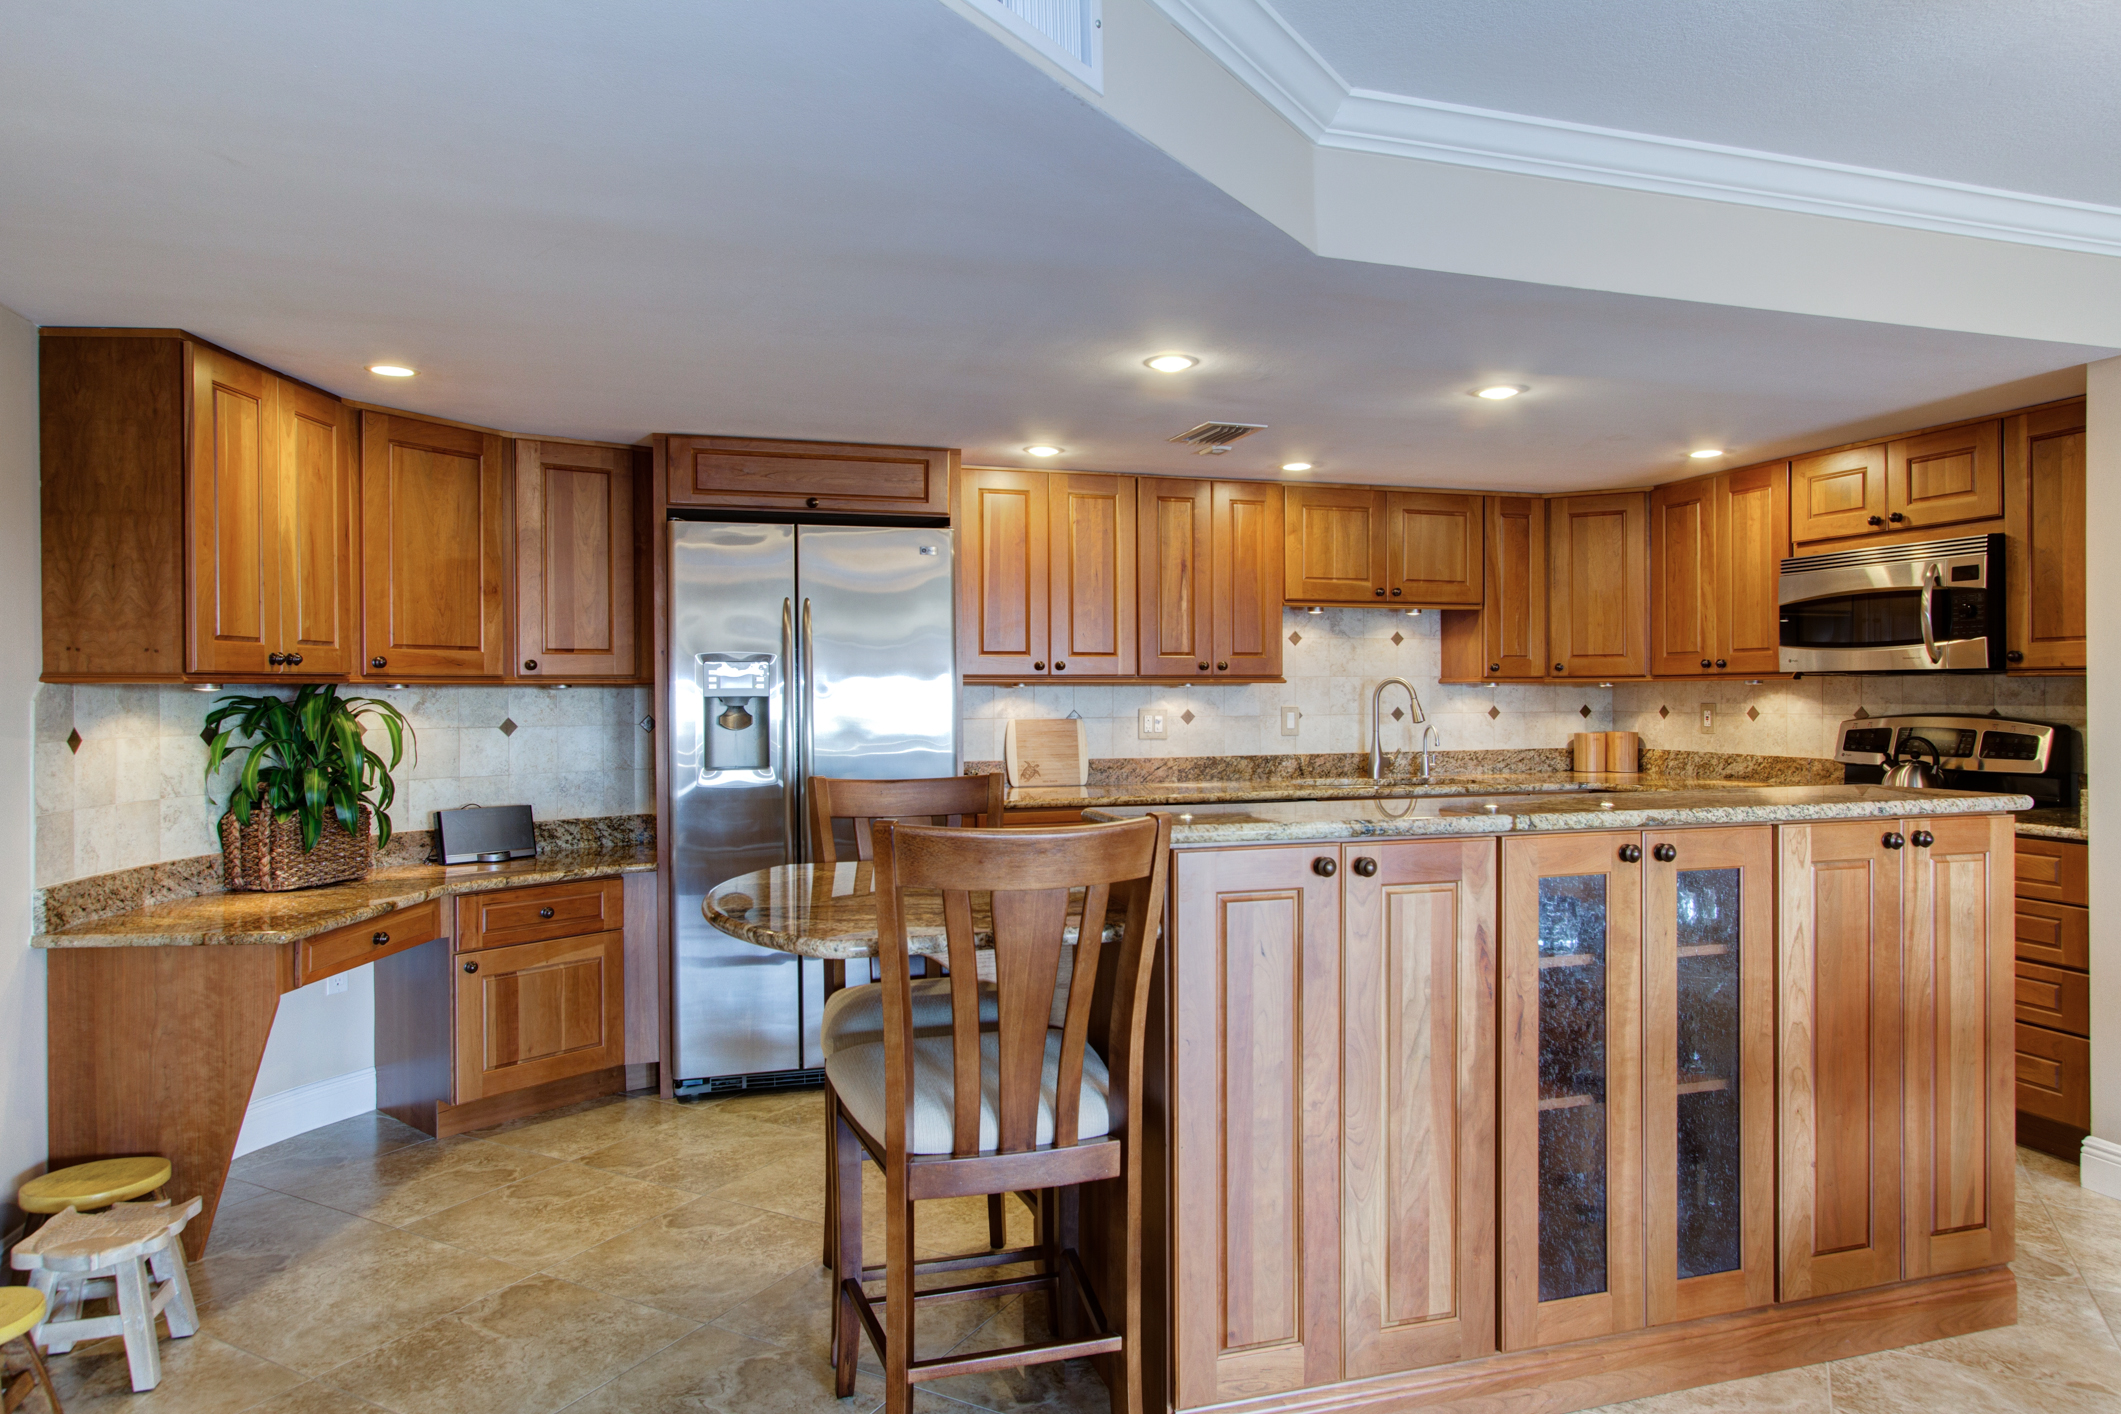 Island kitchen with stainless steel appliances and custom cabinetry